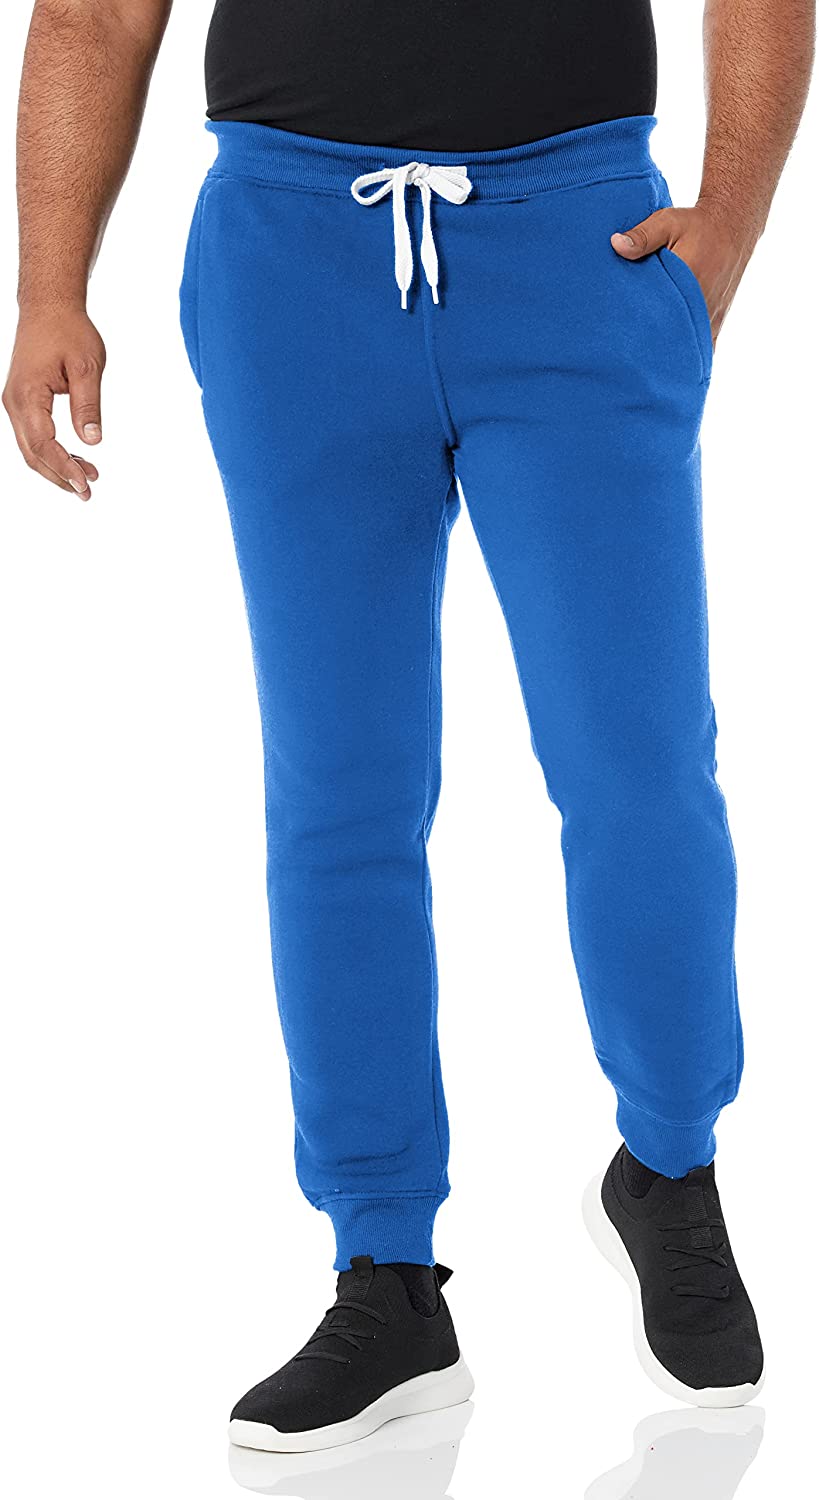  Southpole Mens Active Fleece Open Bottom Sweatpants-Regular  And Big & Tall Sizes